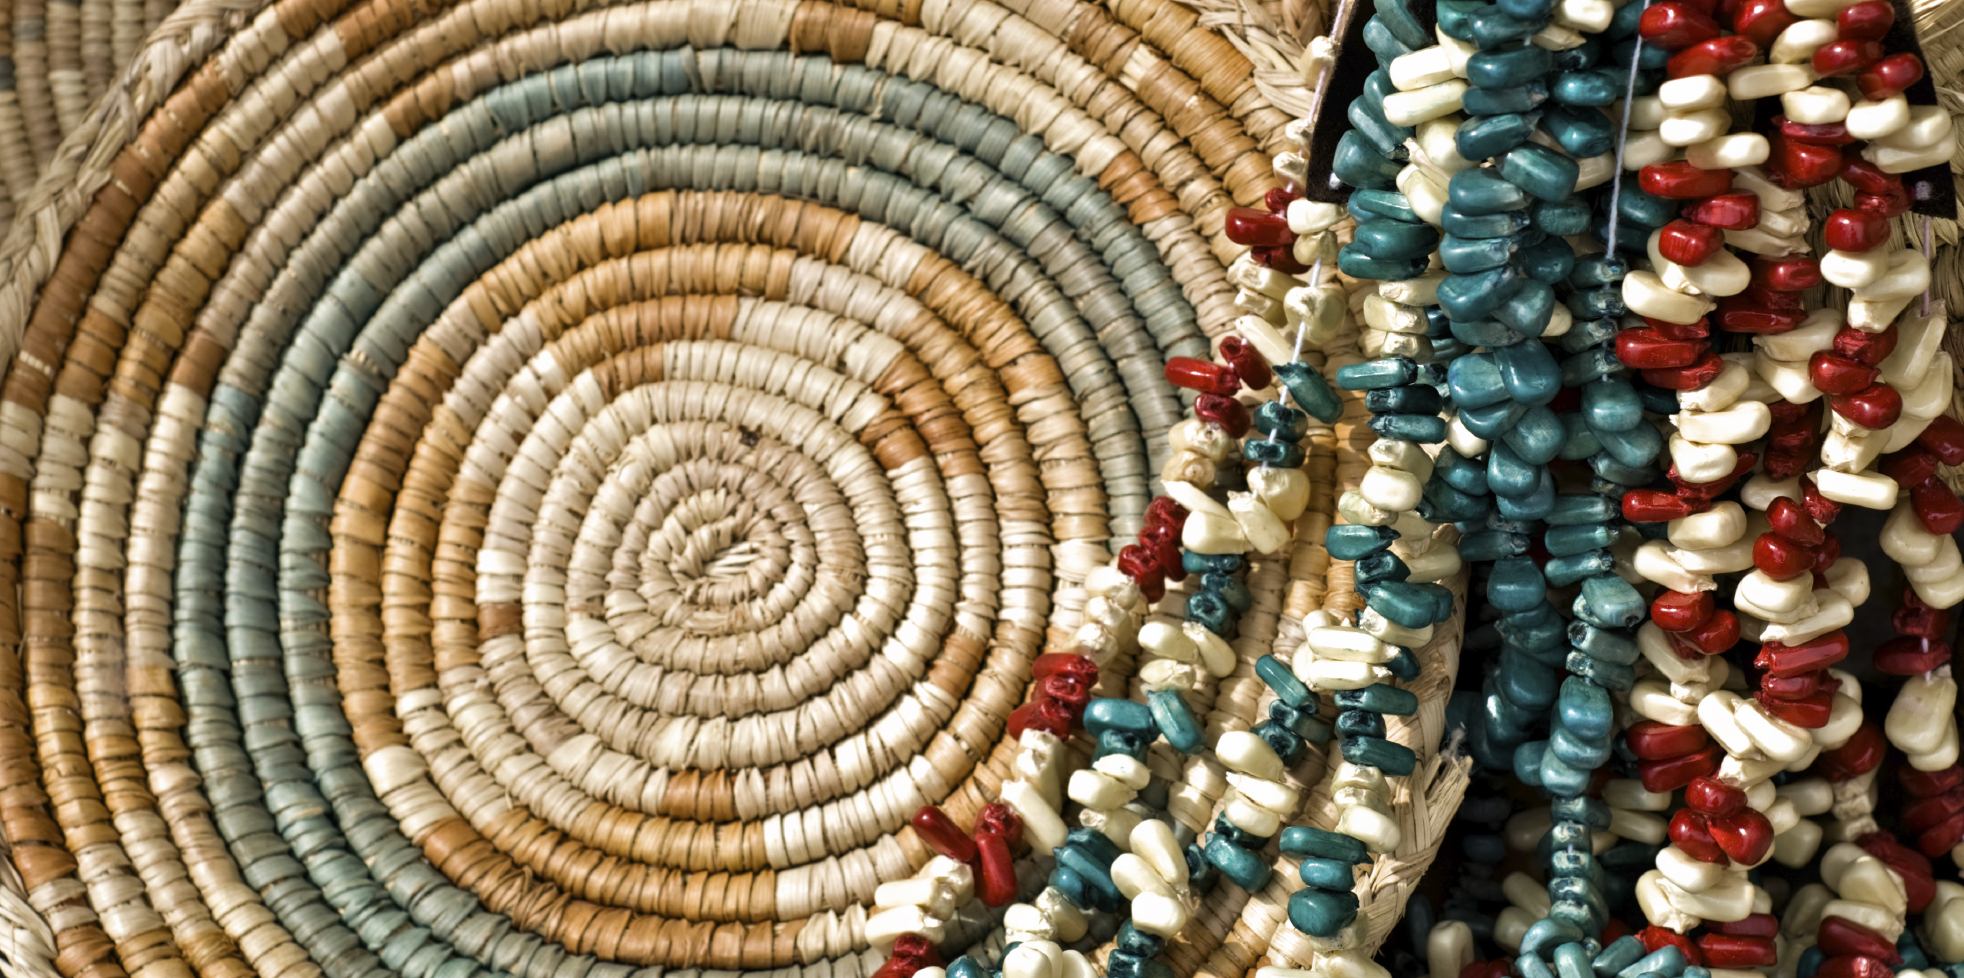 Indian Corn Beads and Basket